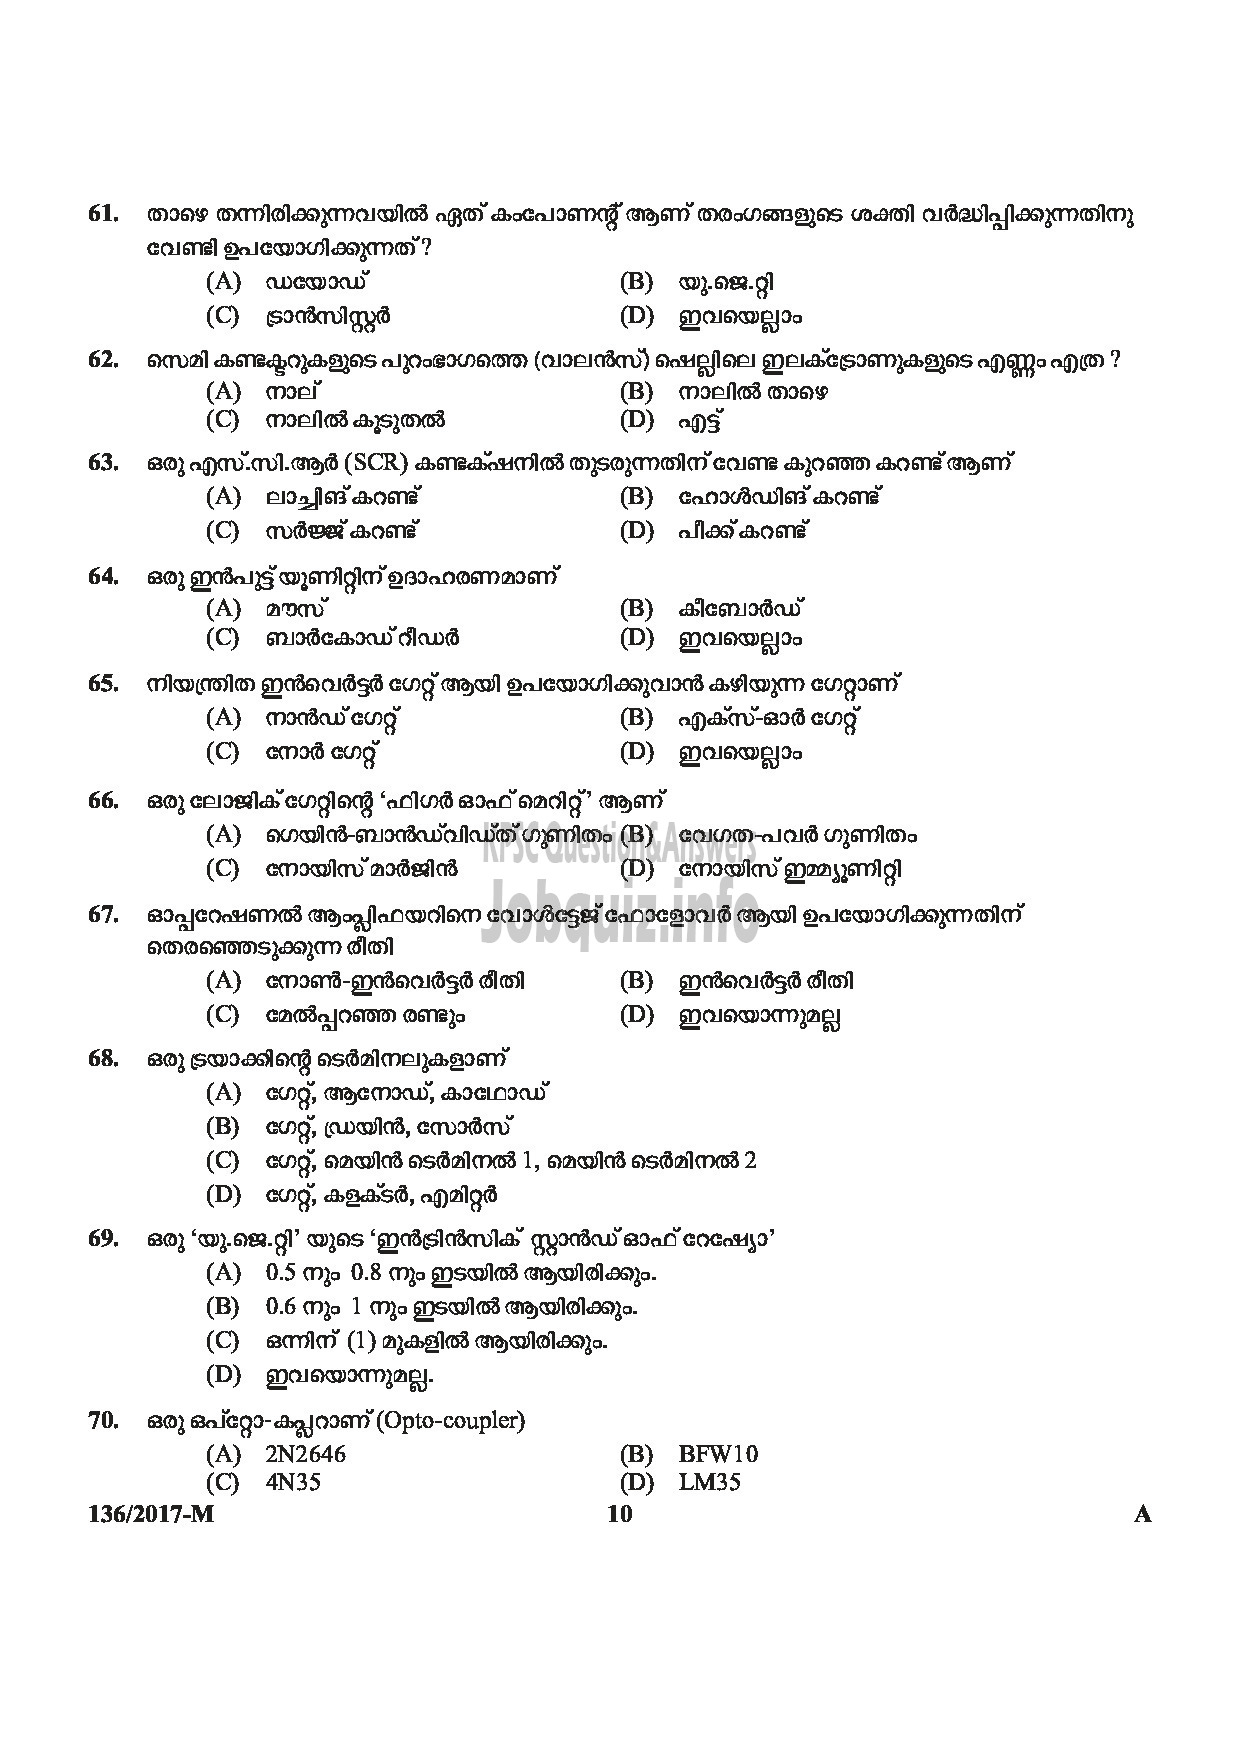 Kerala PSC Question Paper - METER READER/SPOT BILLER SPECIAL RECRUITMENT FROM AMONG ST ONLY MEDIUM OF QUESTION MALAYALAM-10